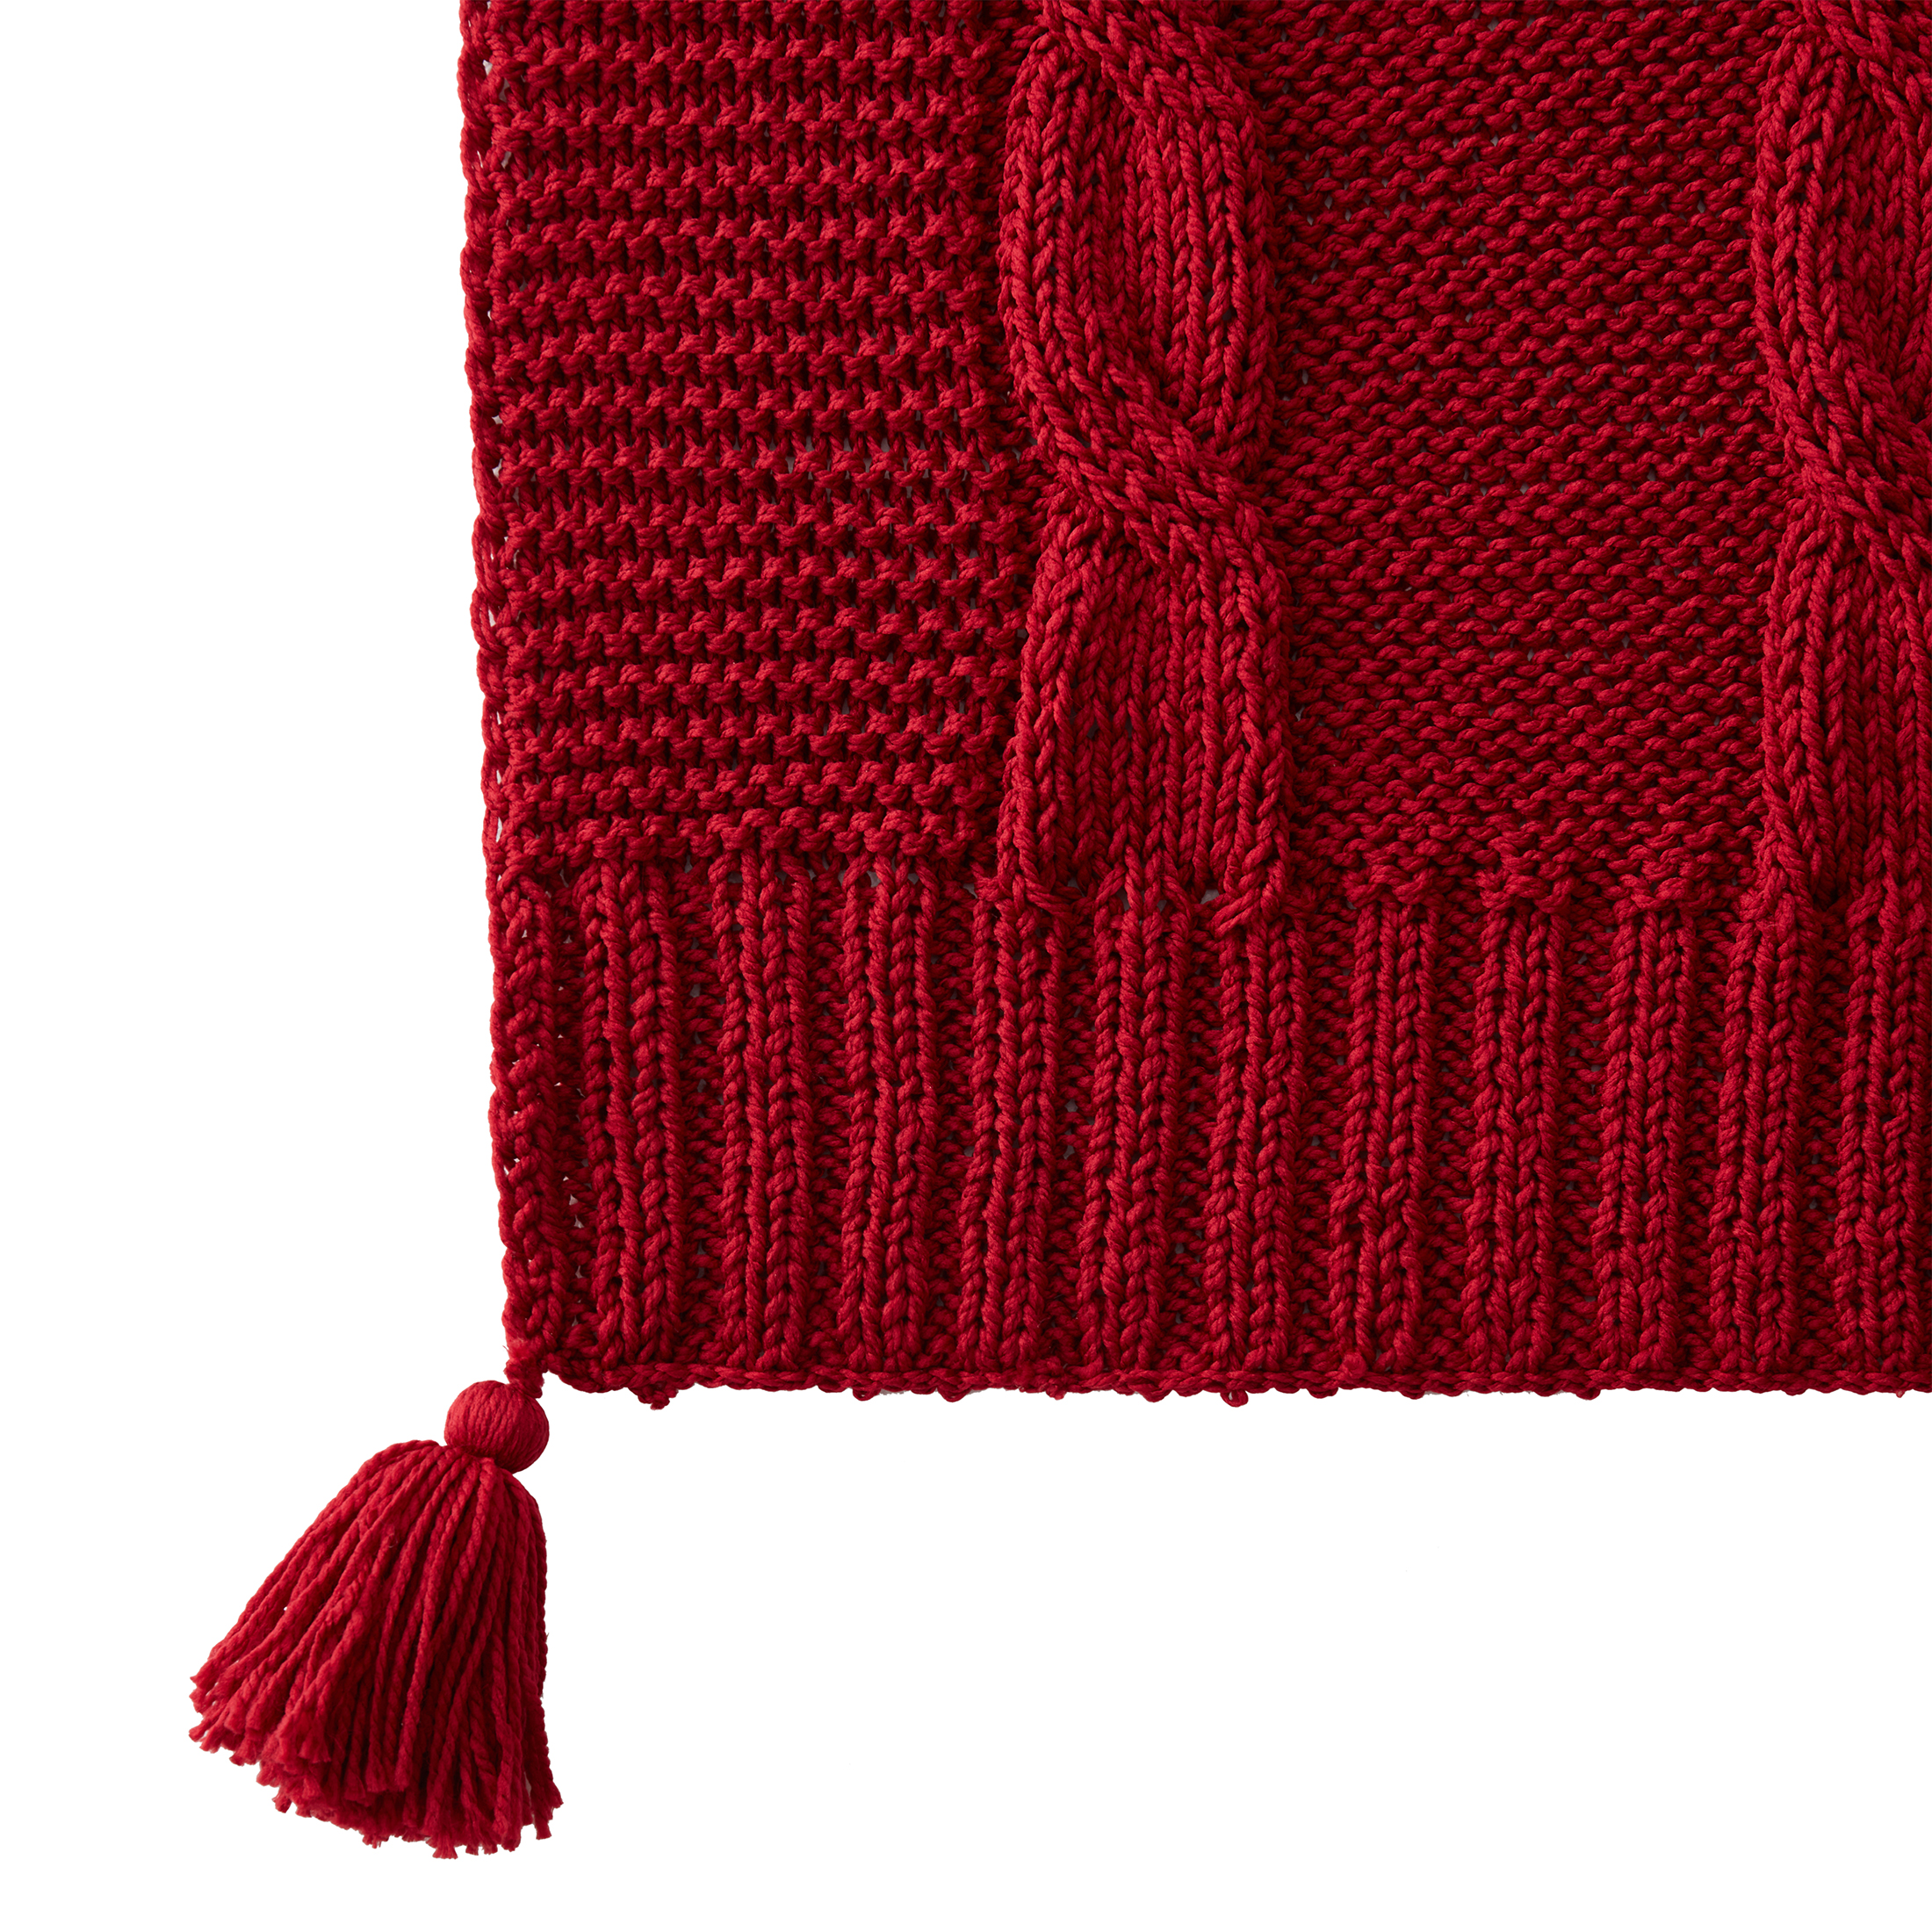 My Texas House Willow Cable Knit Cotton Throw Blanket, Red, Standard Throw - image 5 of 5